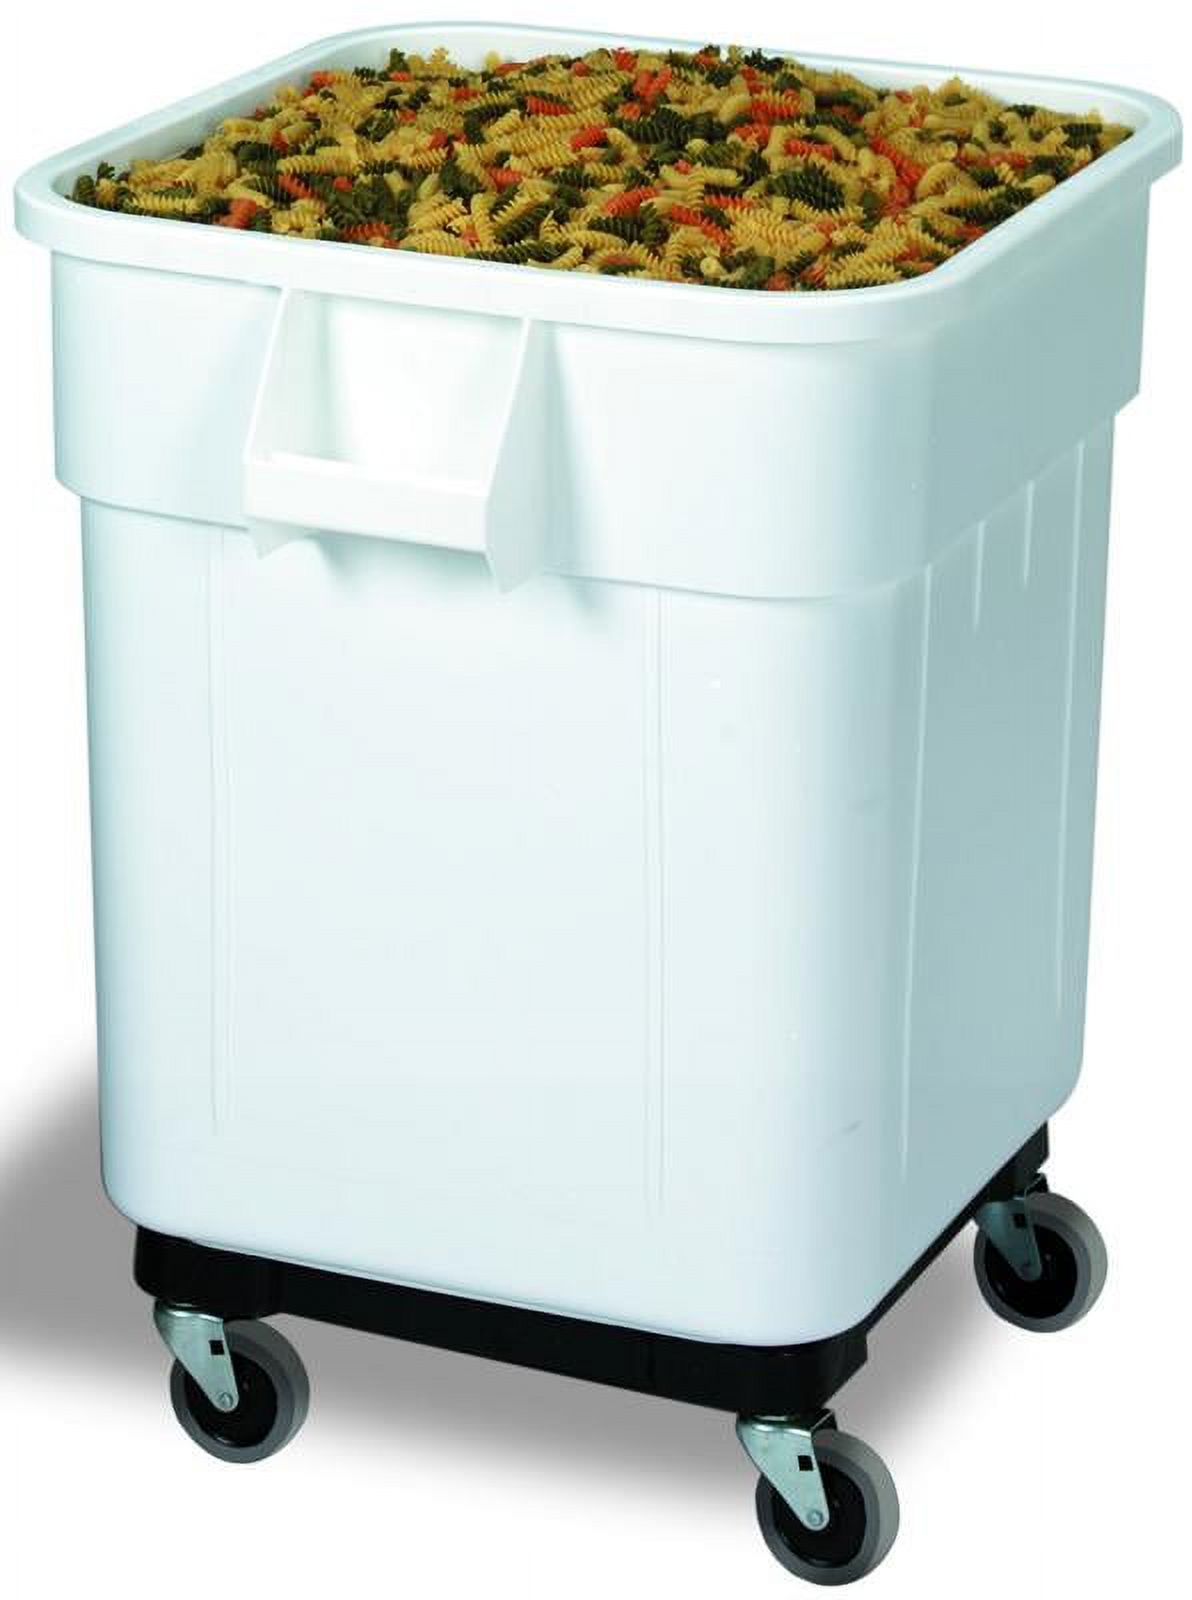 CONTINENTAL COMMERCIAL 9332 Ingredient Bin, 32 gal Capacity, Square, Plastic, White - image 1 of 1